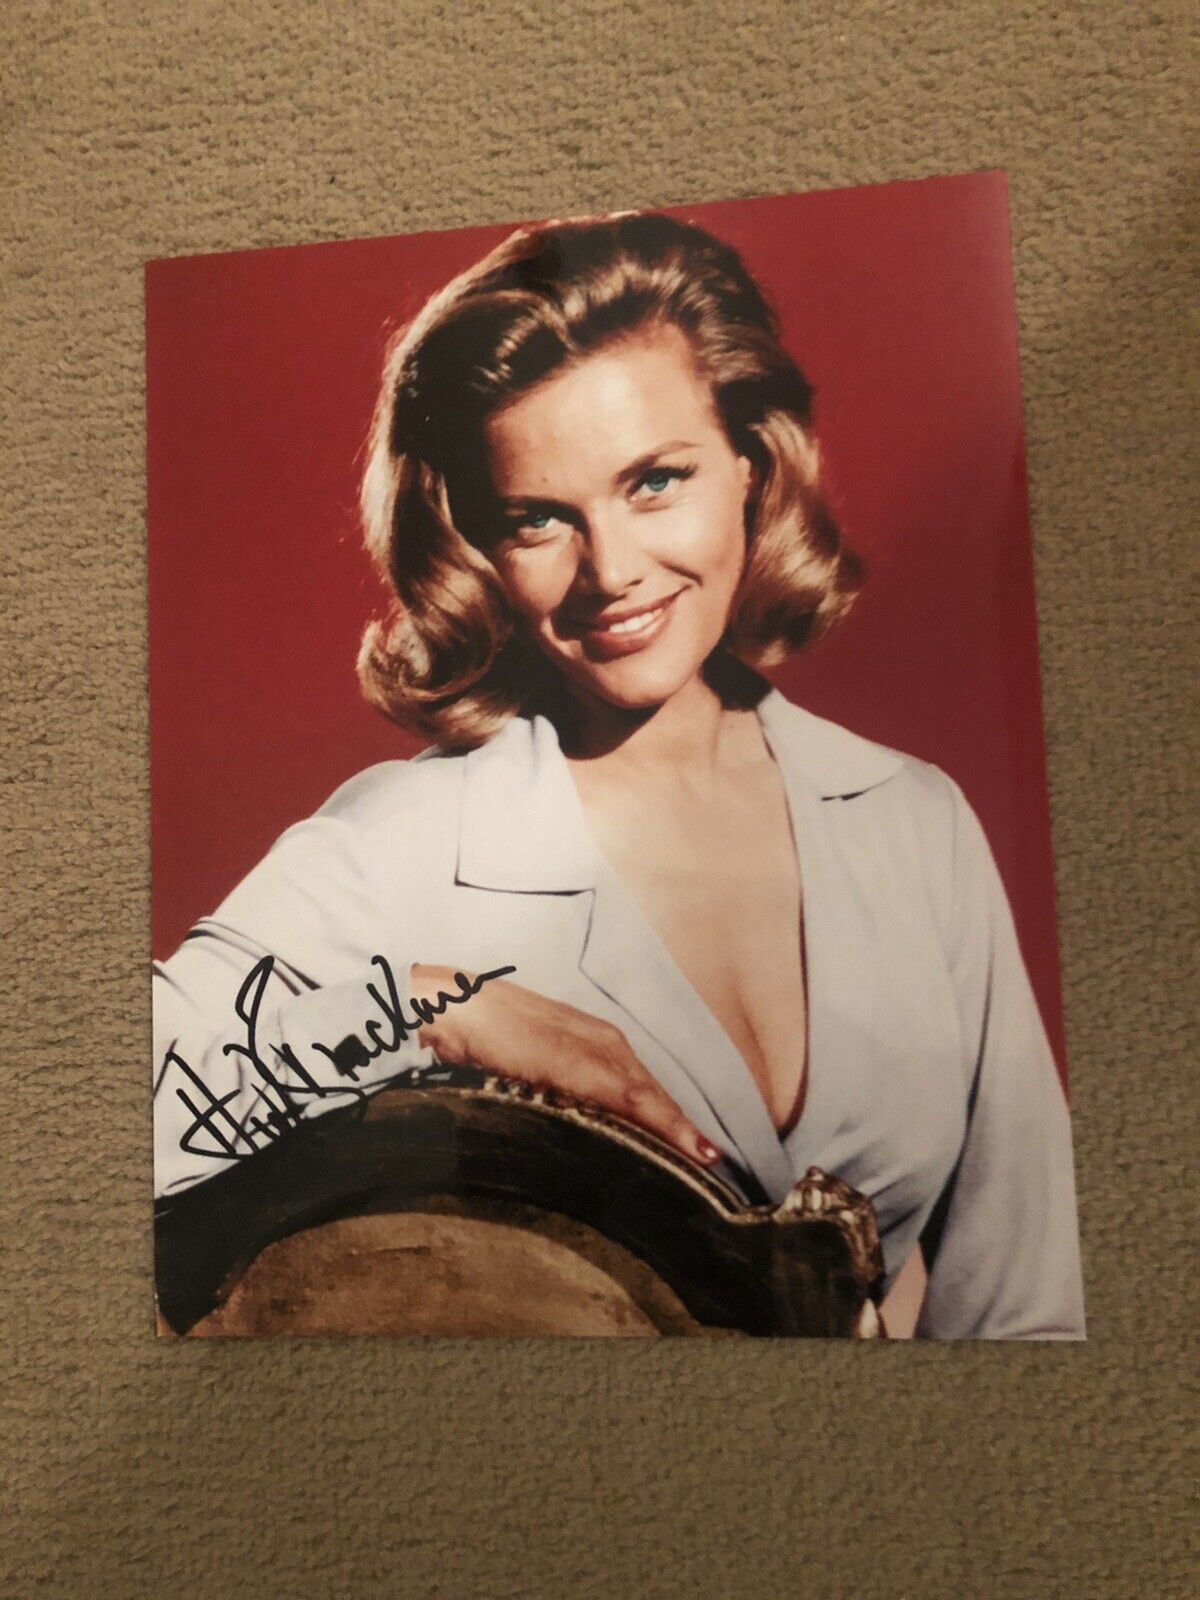 HONOR BLACKMAN (ACTRESS) PRESIGNED Photo Poster painting- 10x8”